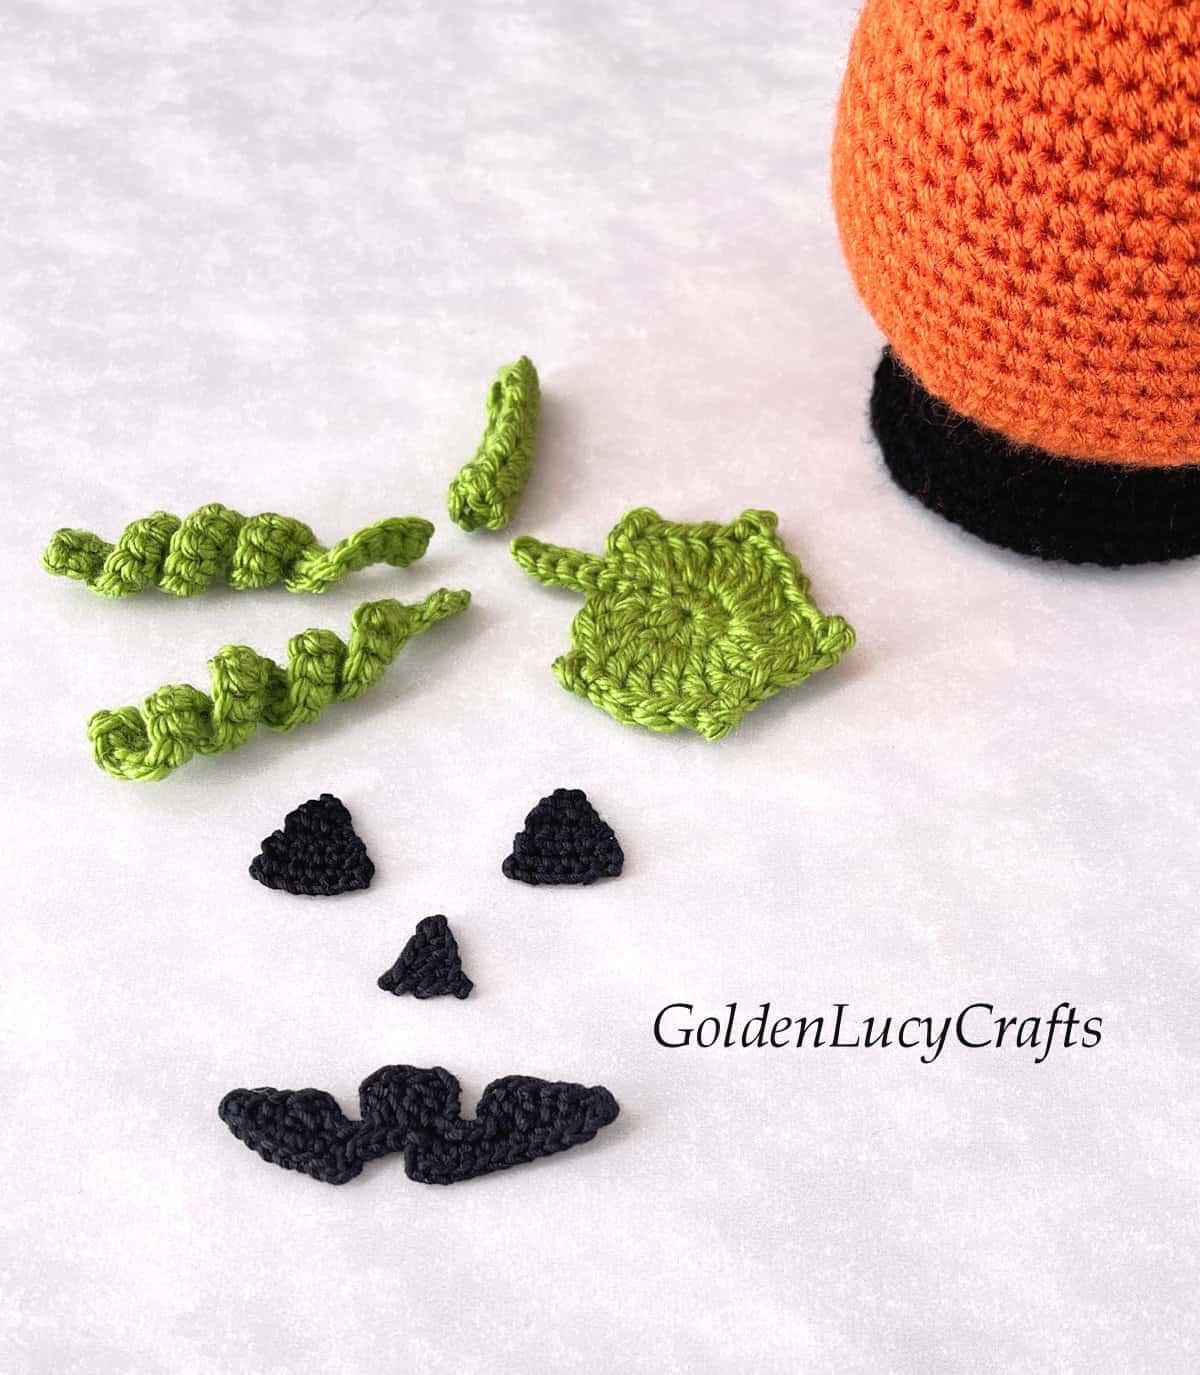 Crocheted face elements for the pumpkin snow globe.